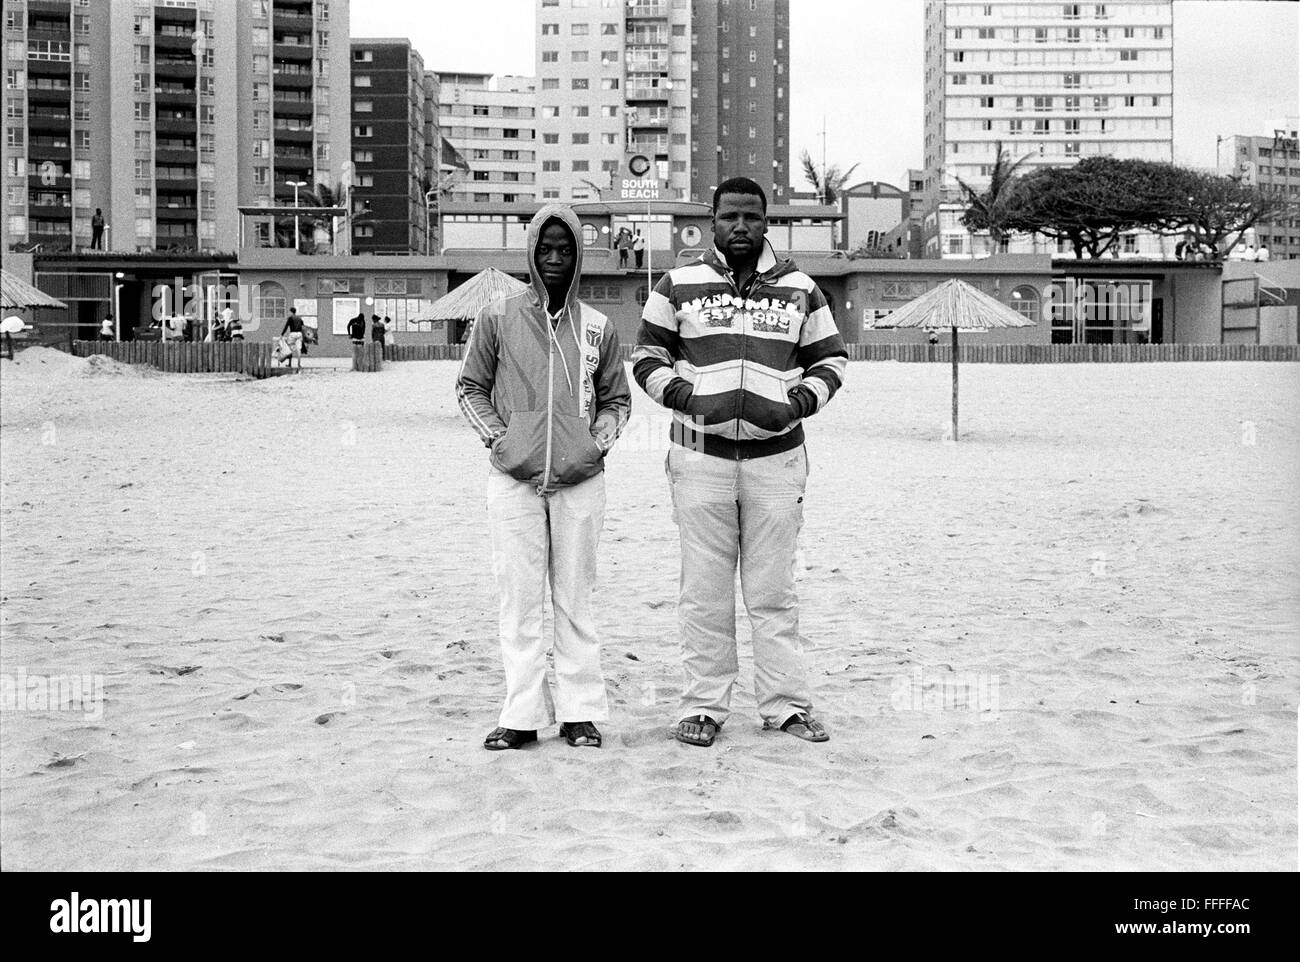 Jan 4, 2016 - South Beach, KwaZulu-Natal, South Africa - Two men stand in front of the South Beach Life Saving Club. South Beach is a part of the City of Durban's longest uninterrupted stretch of beach sand. The City of Durban is on the eastern seaboard of South Africa and the people here are washed with the warm waters of the Indian Ocean. To the north of this stretch of sand are beaches with cafe society hang outs. To the south there is a pier with the upmarket Moyo's Restaurant at it's end and the uShaka Marine World complex and the private surf and sea clubs of the Vetches Beach area. Betw Stock Photo